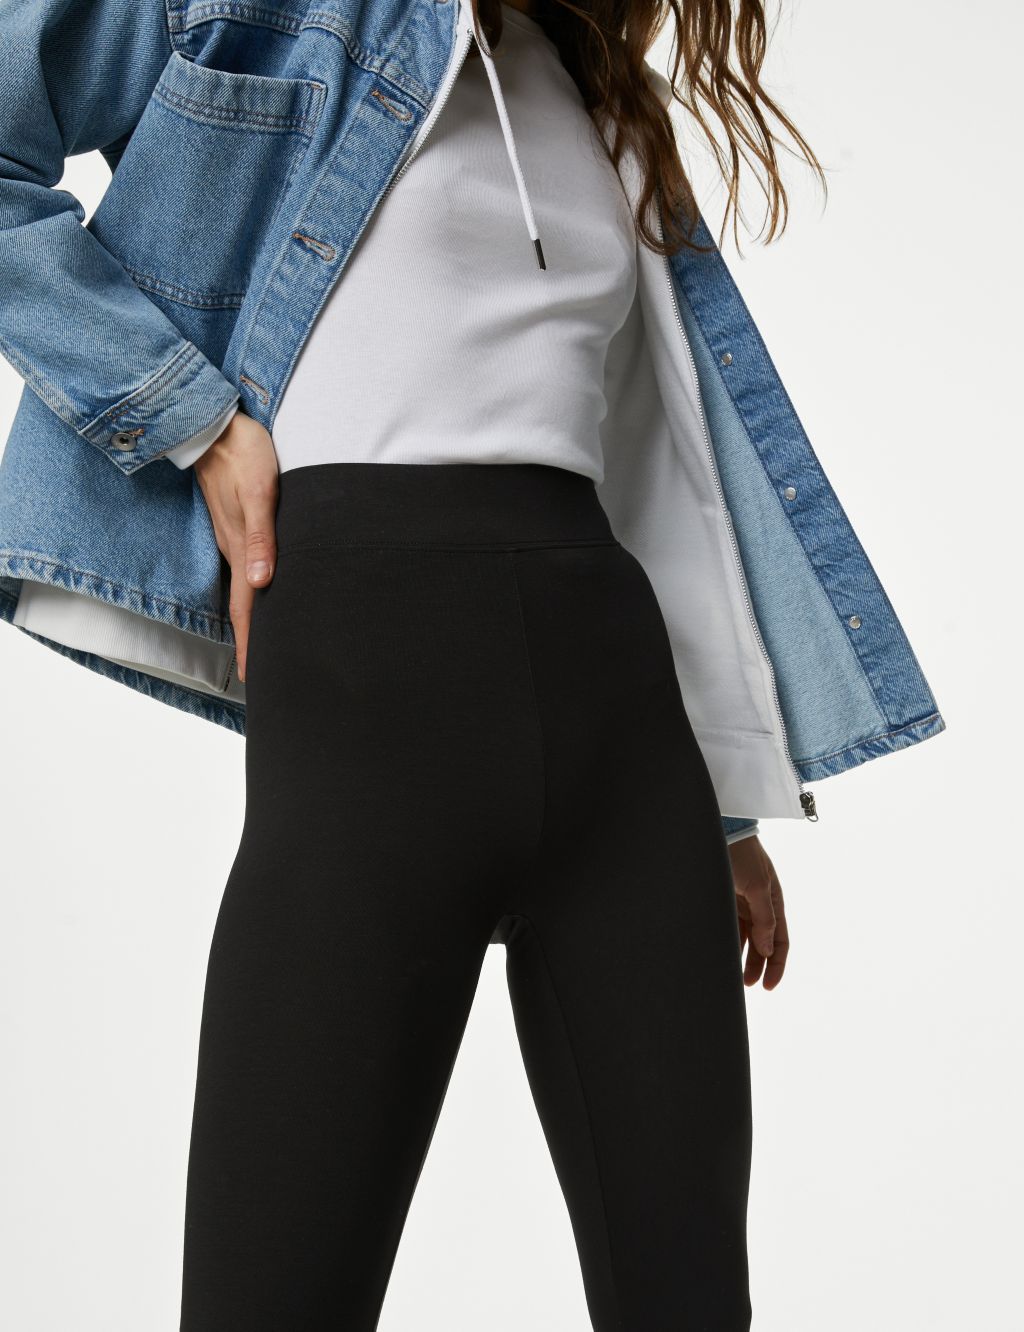 2pk High Waisted Leggings, M&S Collection